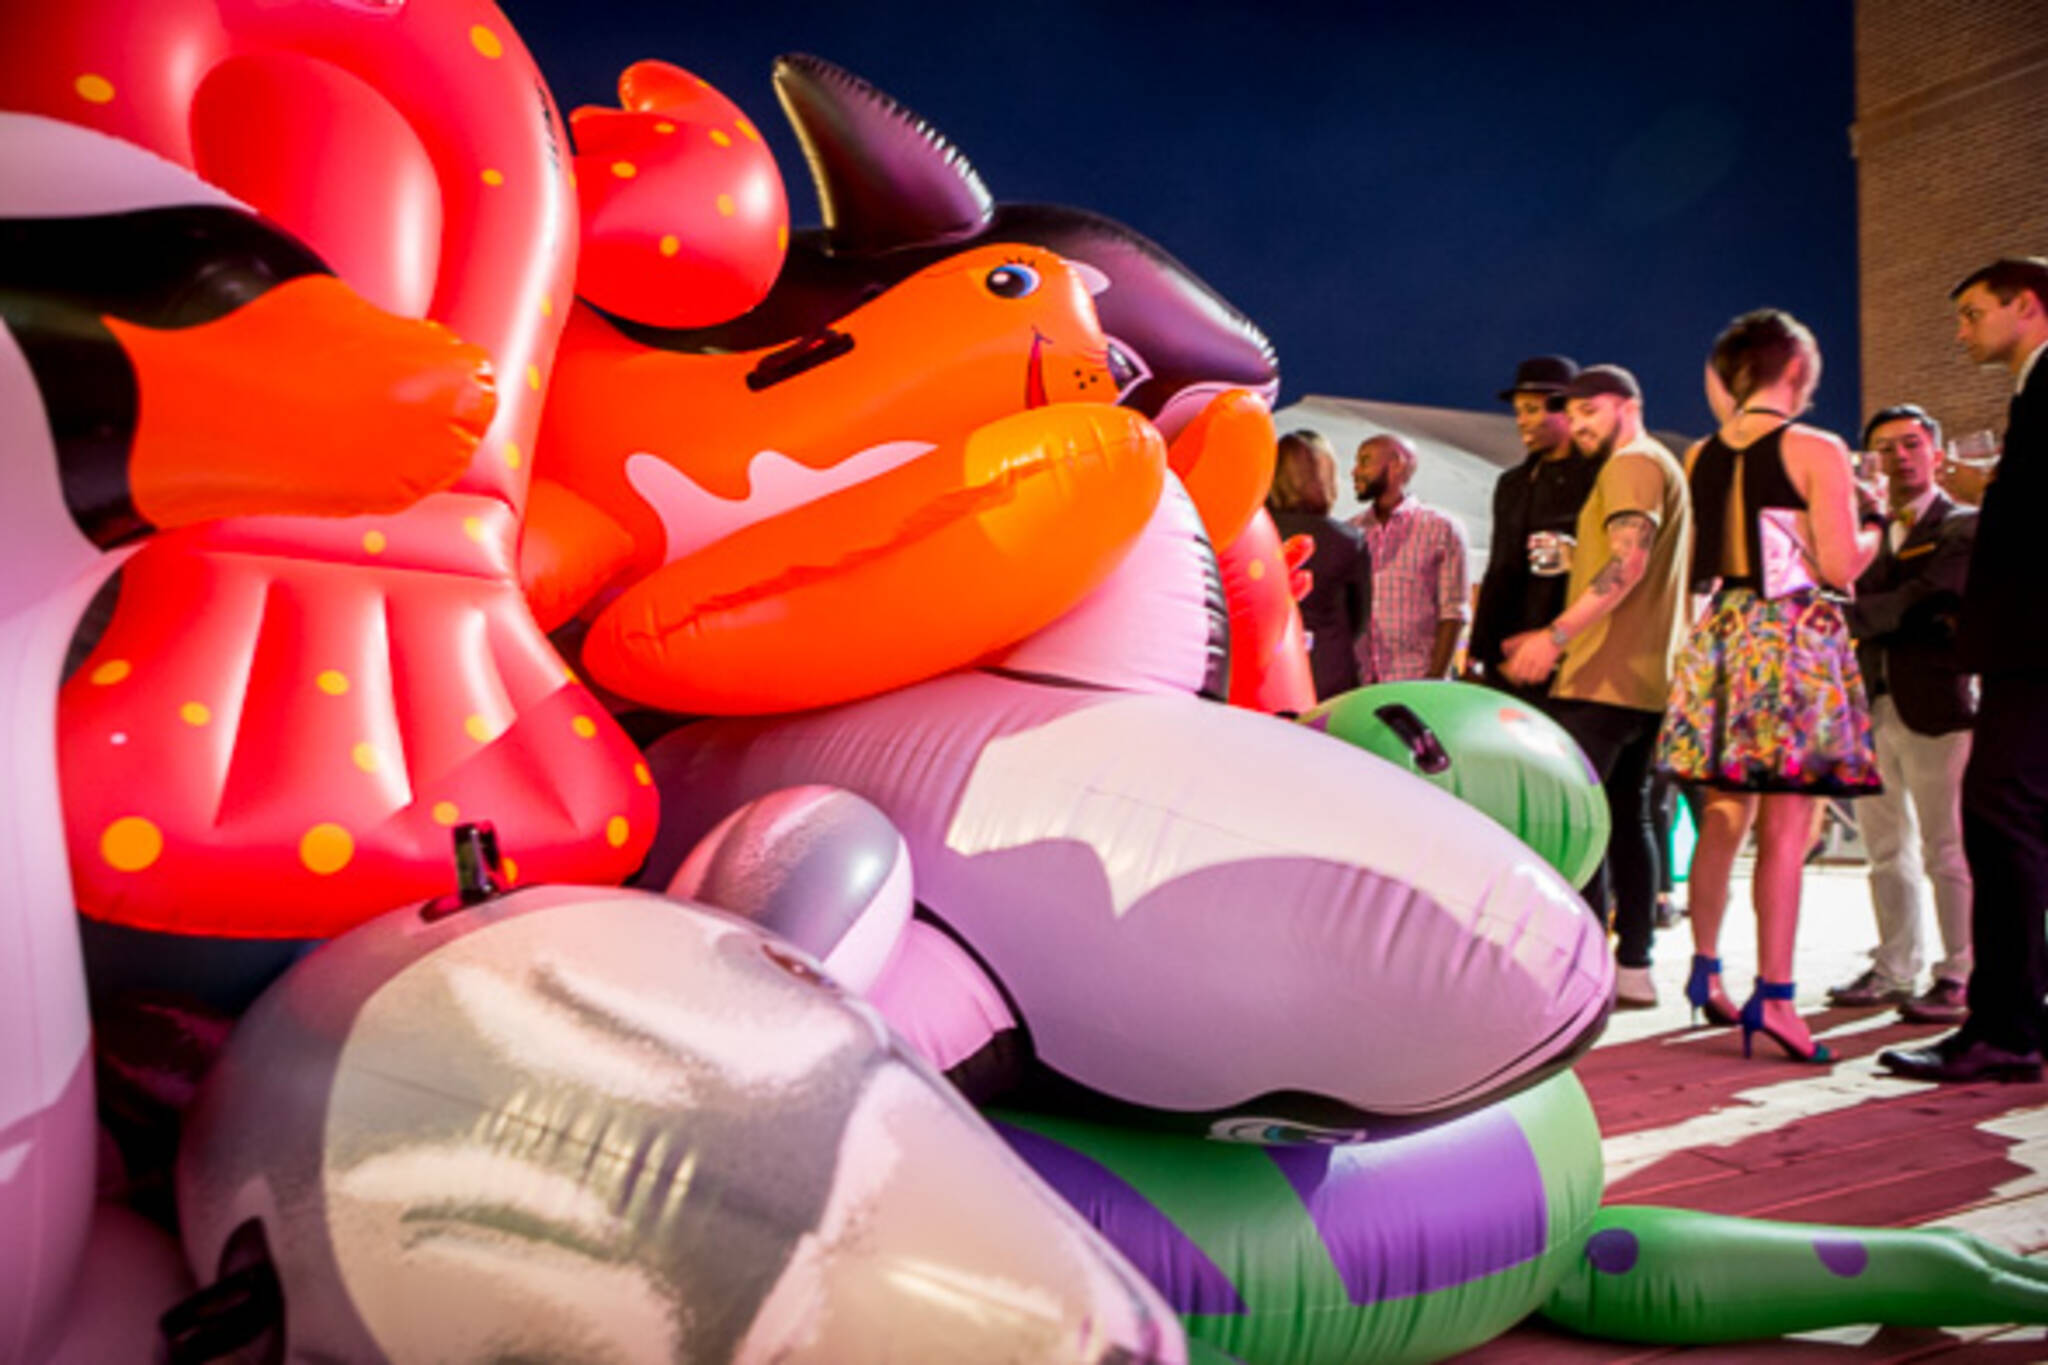 Pool toys make it a party at Toronto's annual Power Ball